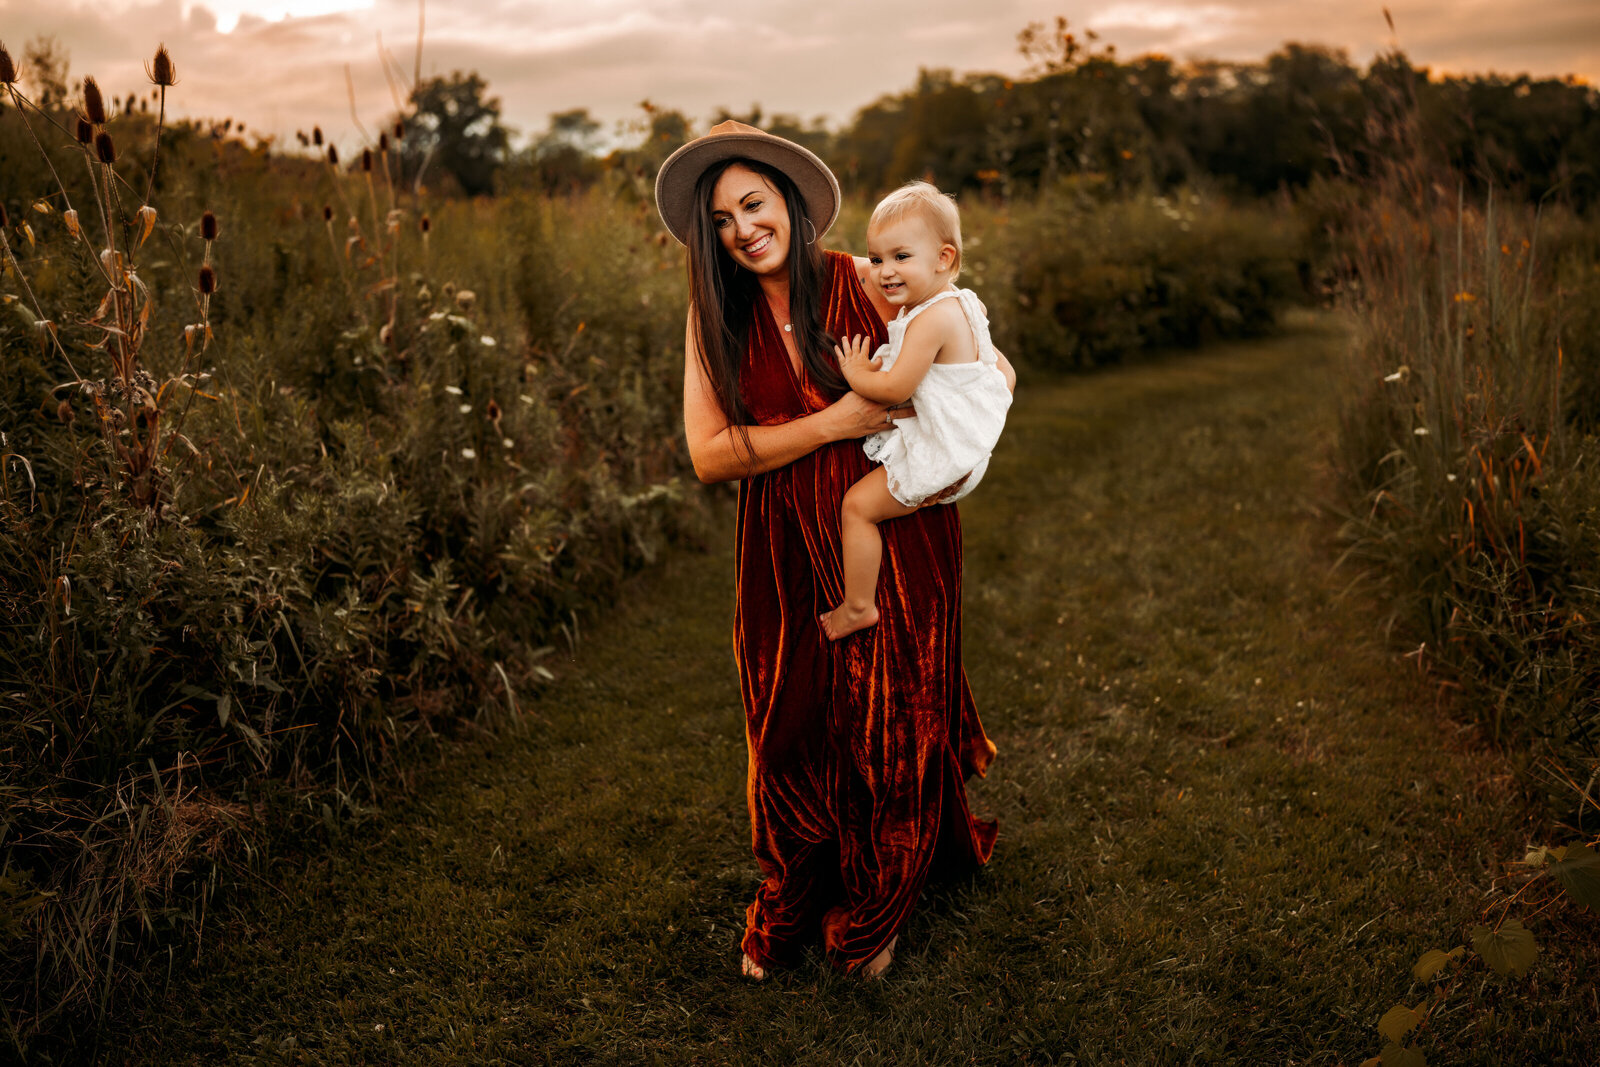 Mother holds daughter while walking through a grassy trail